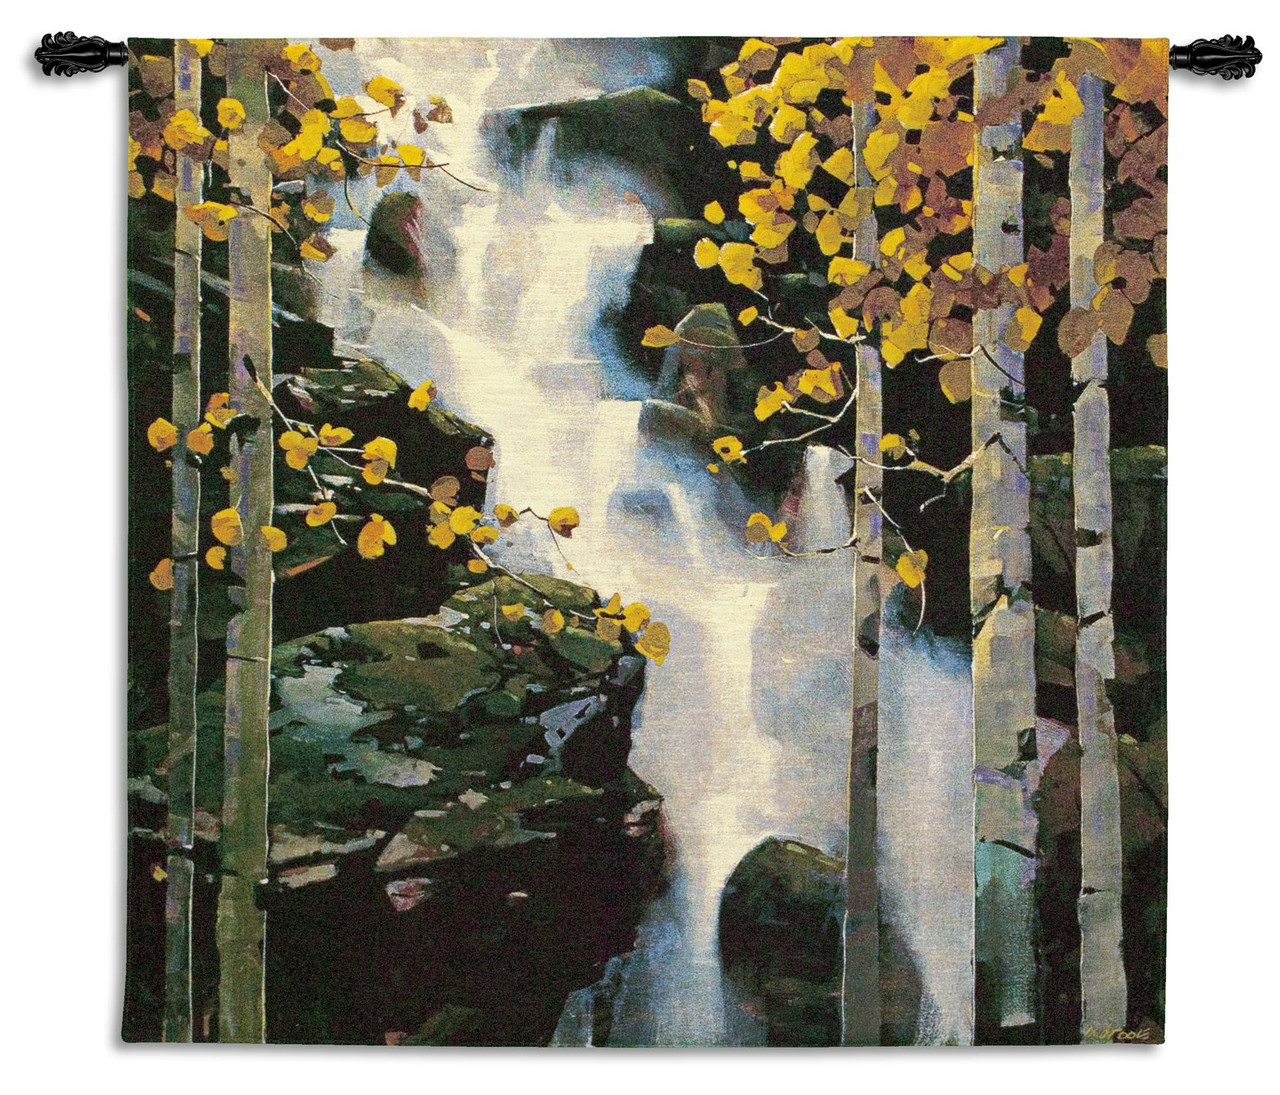 Waterfall by Michael O'Toole Woven Tapestry Wall Art Hanging Gushing  Water in Rocky Birch Landscape 100% Cotton USA Size 53x53